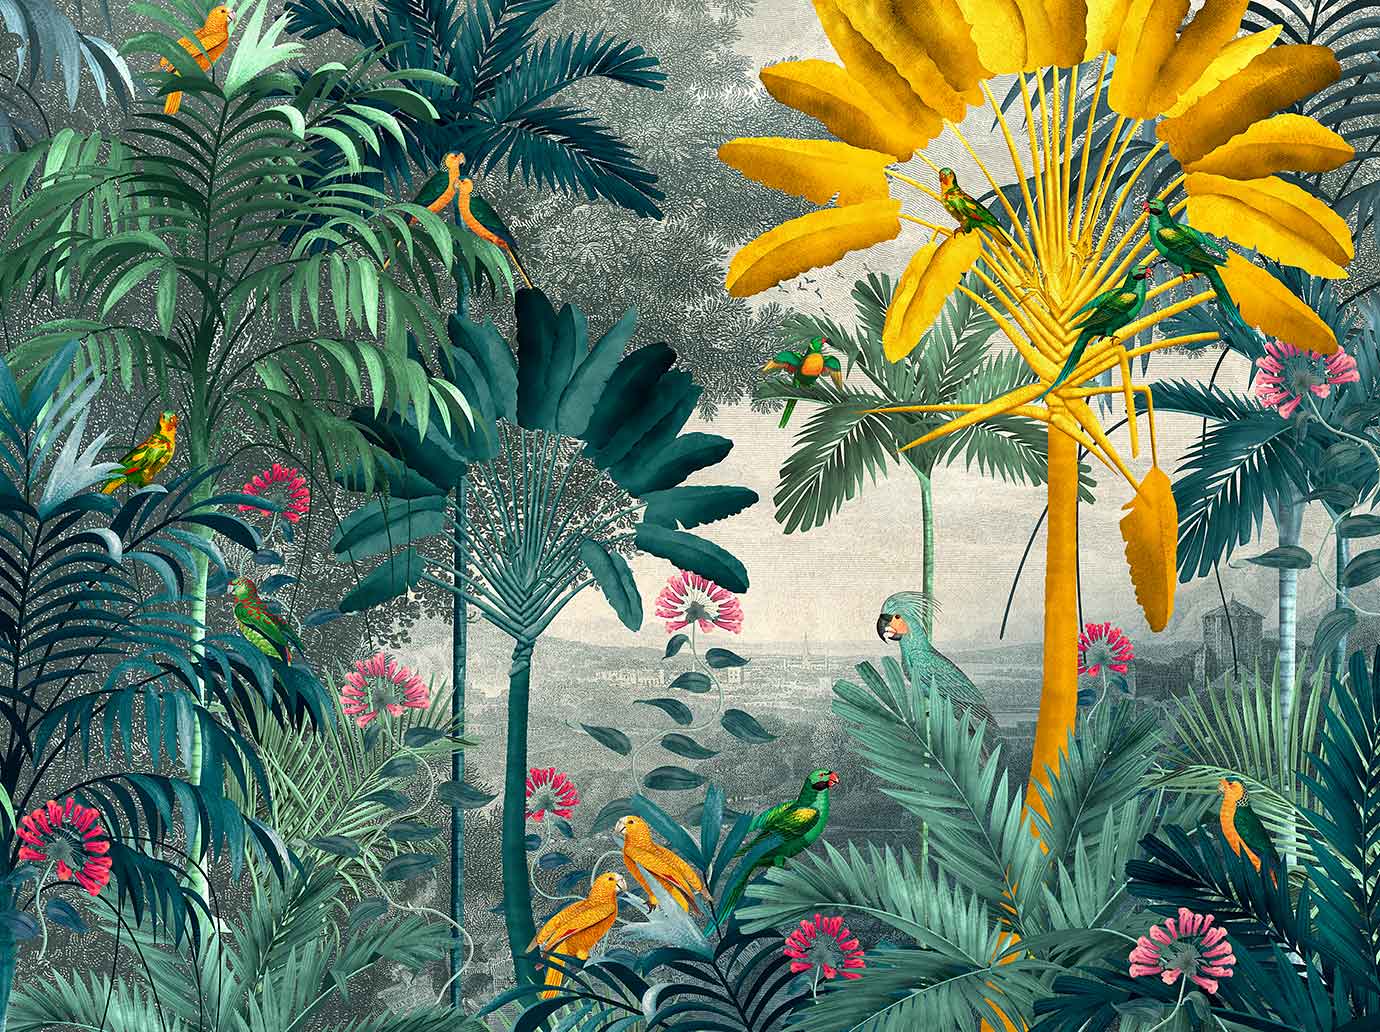 Macaw Kingdom scene design richly layered with palms and cool botanicals